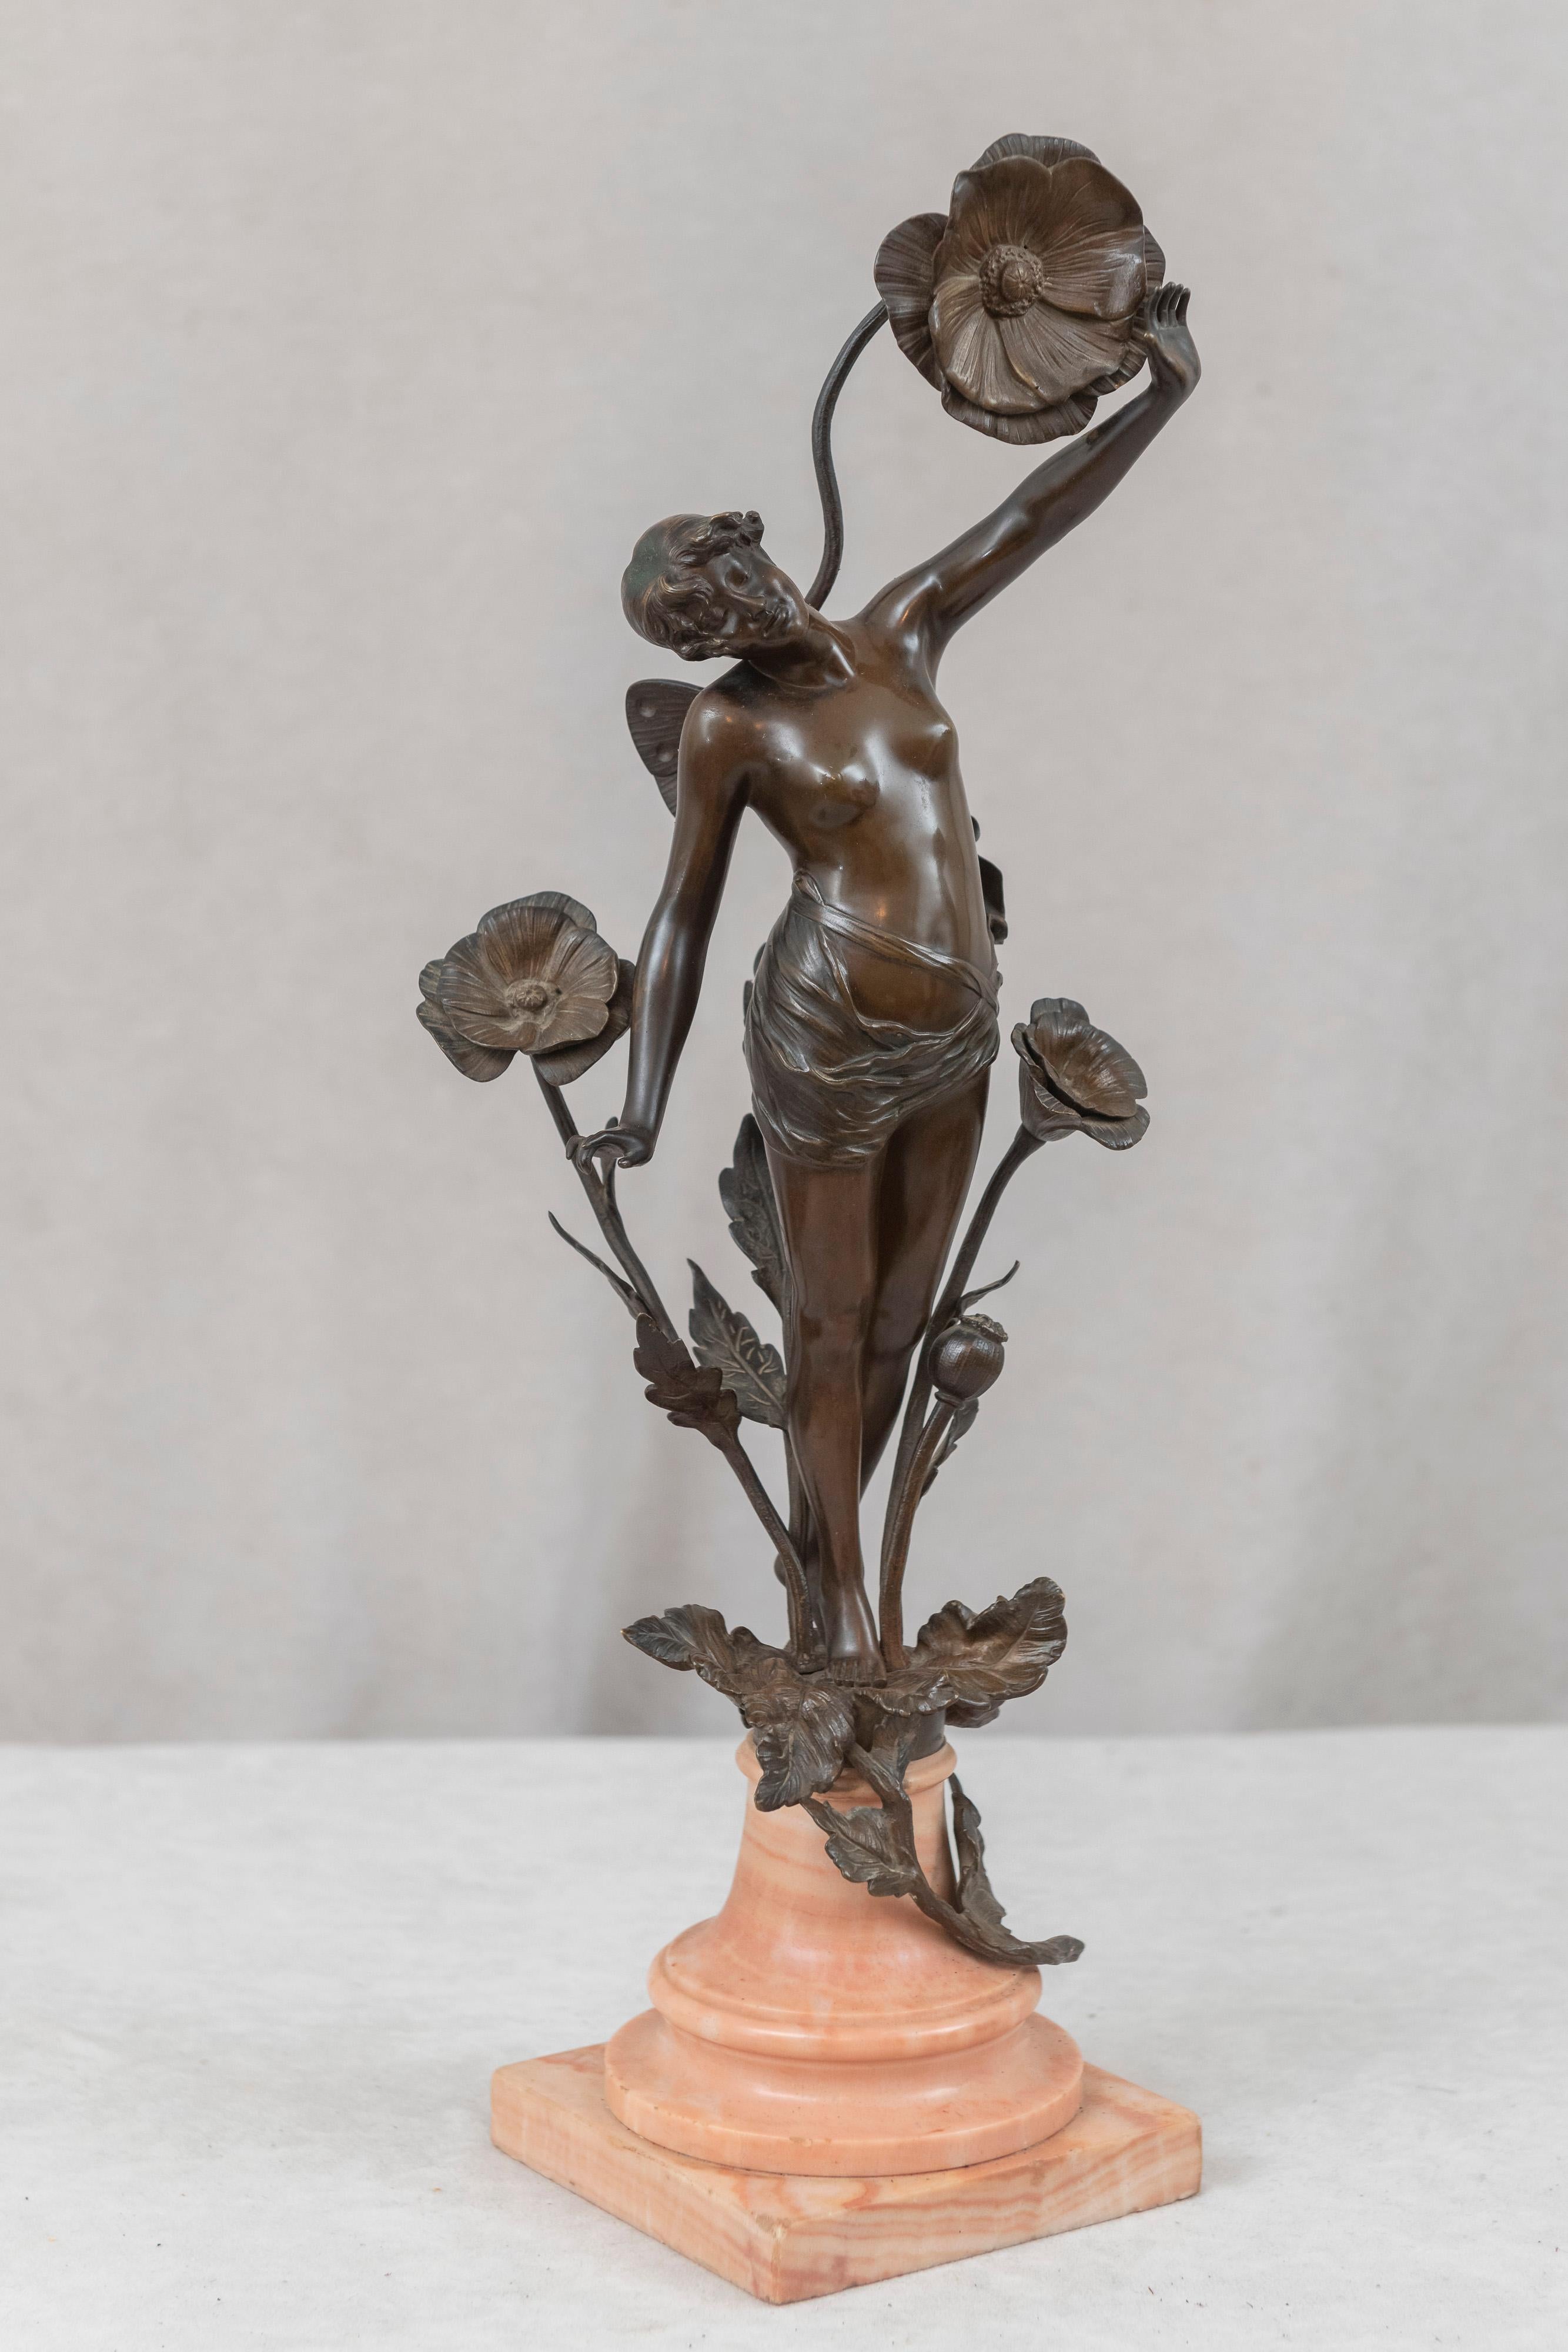  This stunning example of the art nouveau movement was sculpted by one of our favorite artists of the late 19th century Franz Rosse (1858-1900) The partially nude young maiden surrounded by nature and showing butterfly wings is a perfect art nouveau